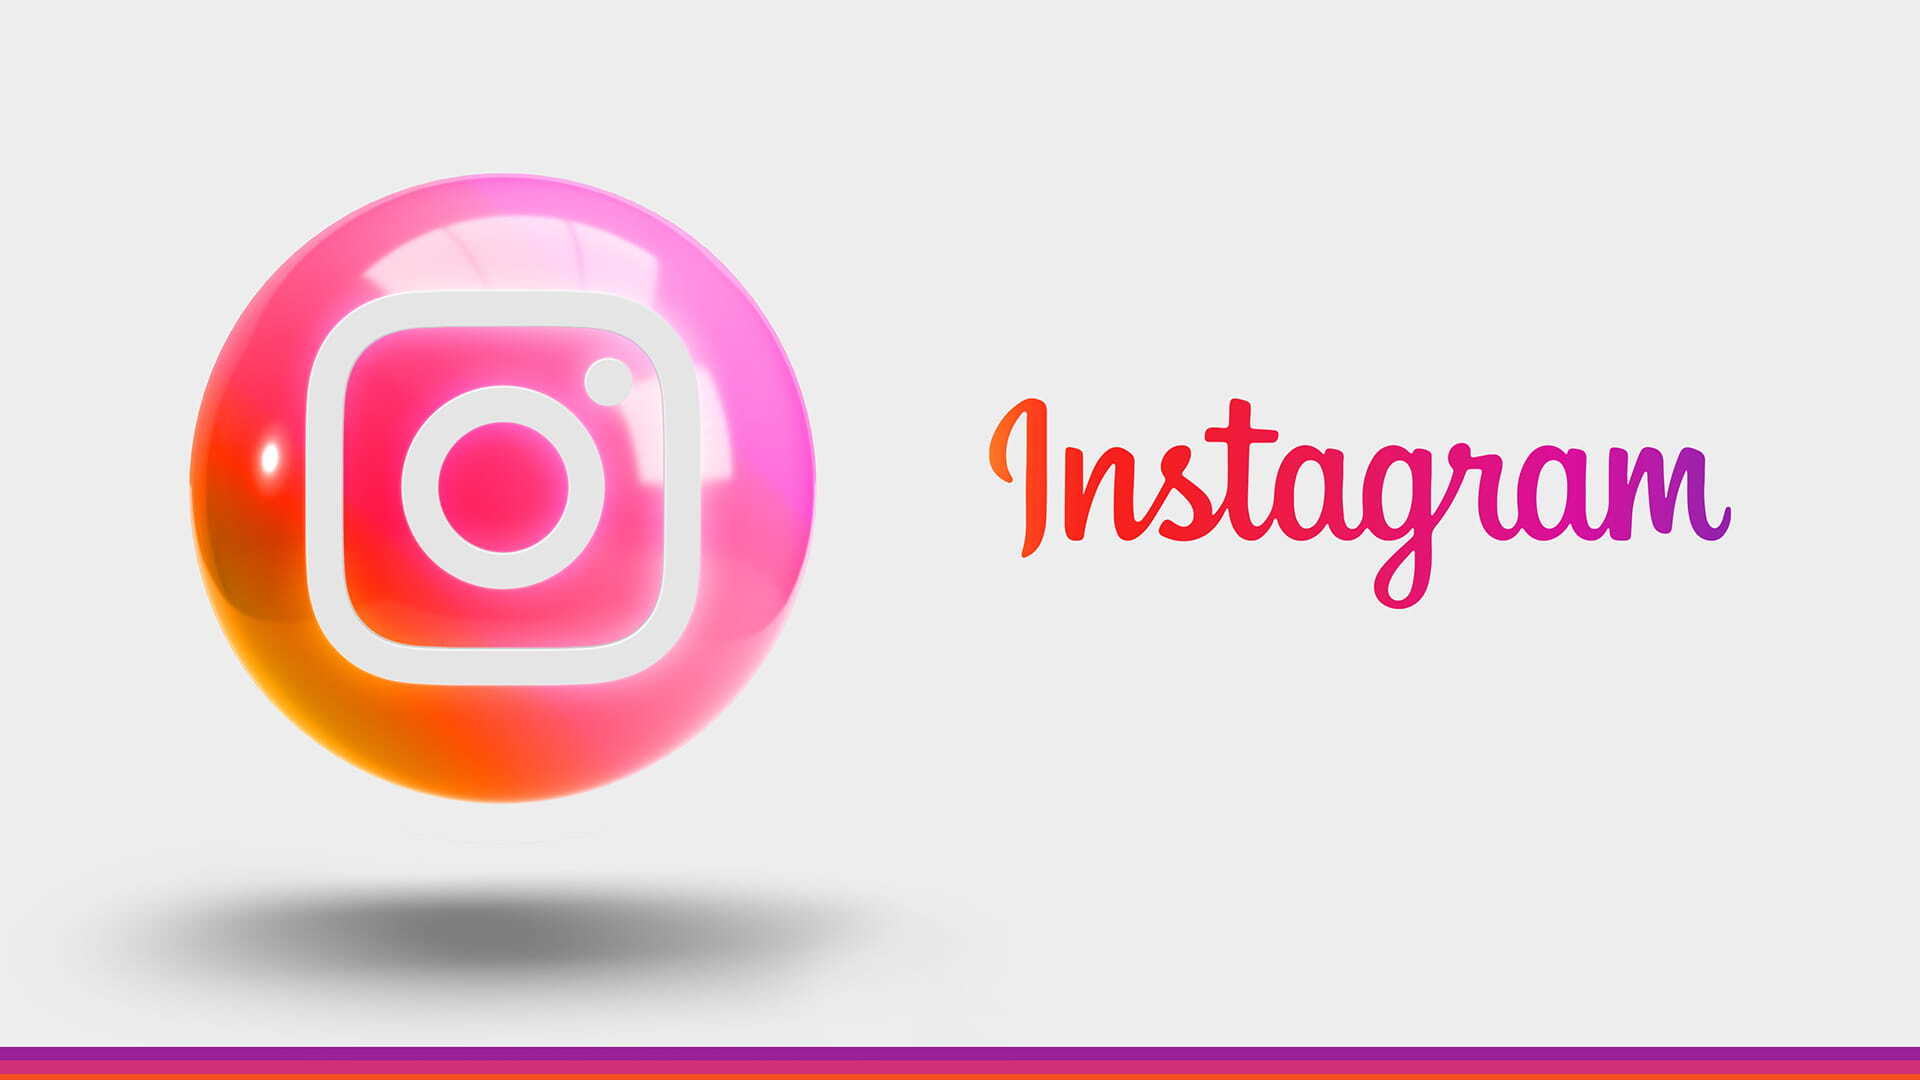 Instagram Crashing, Troubleshooting, step-by-step guide, Instagram app is not working